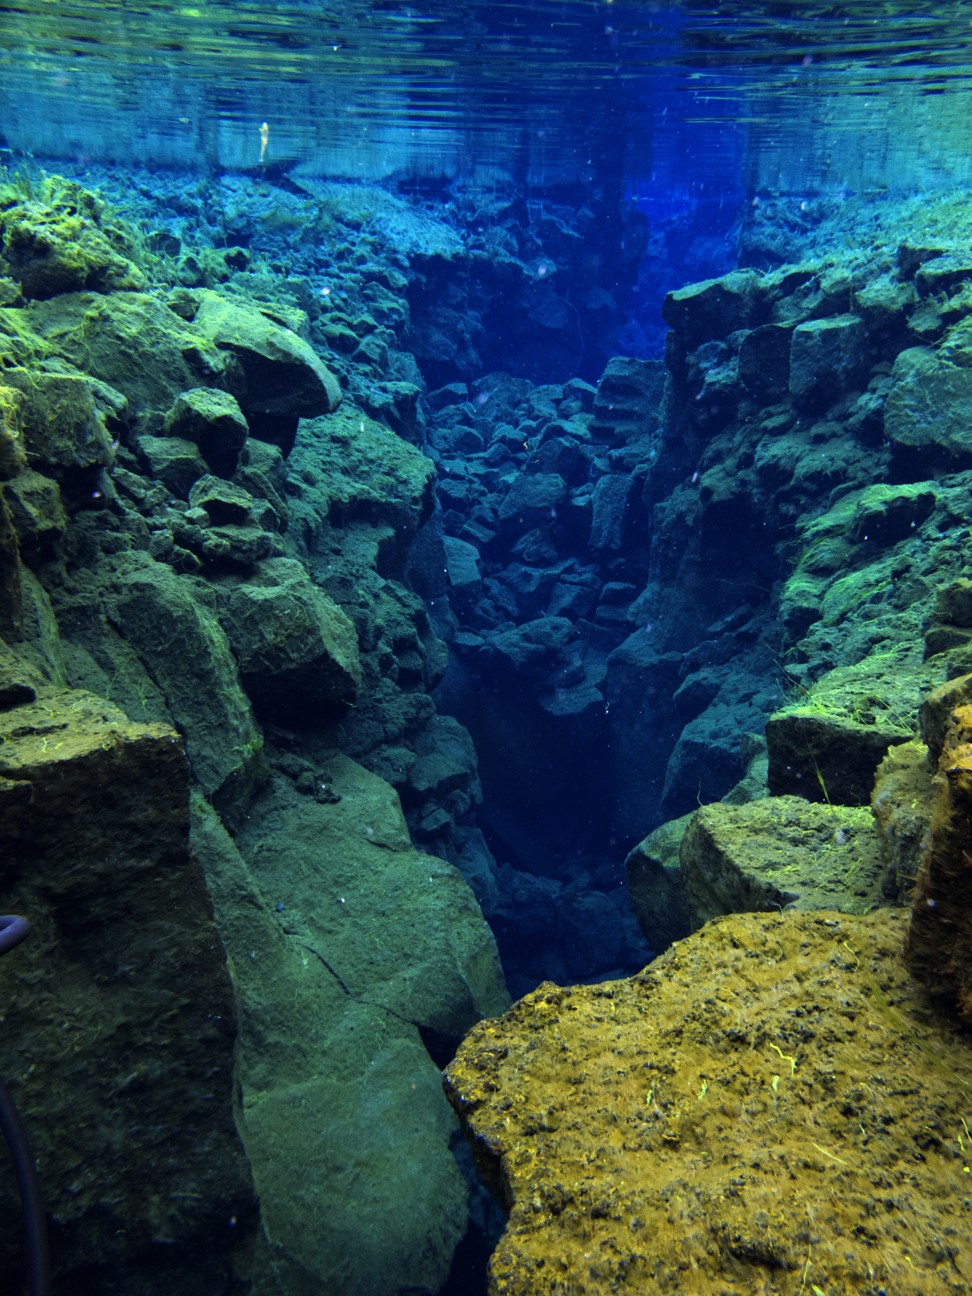 The amazing Silfra Fissure in Iceland